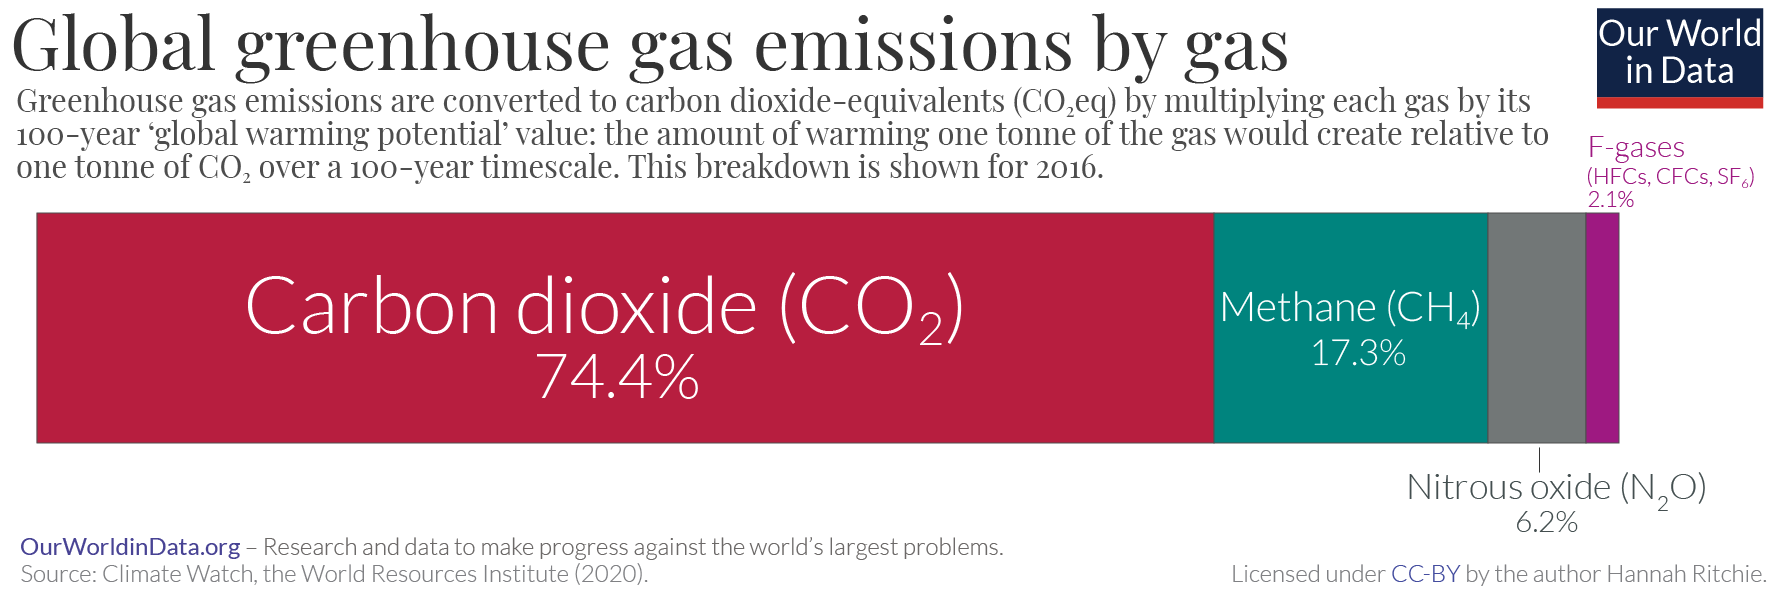 GHG, CO2, CO2e and Carbon: What do all these terms mean?